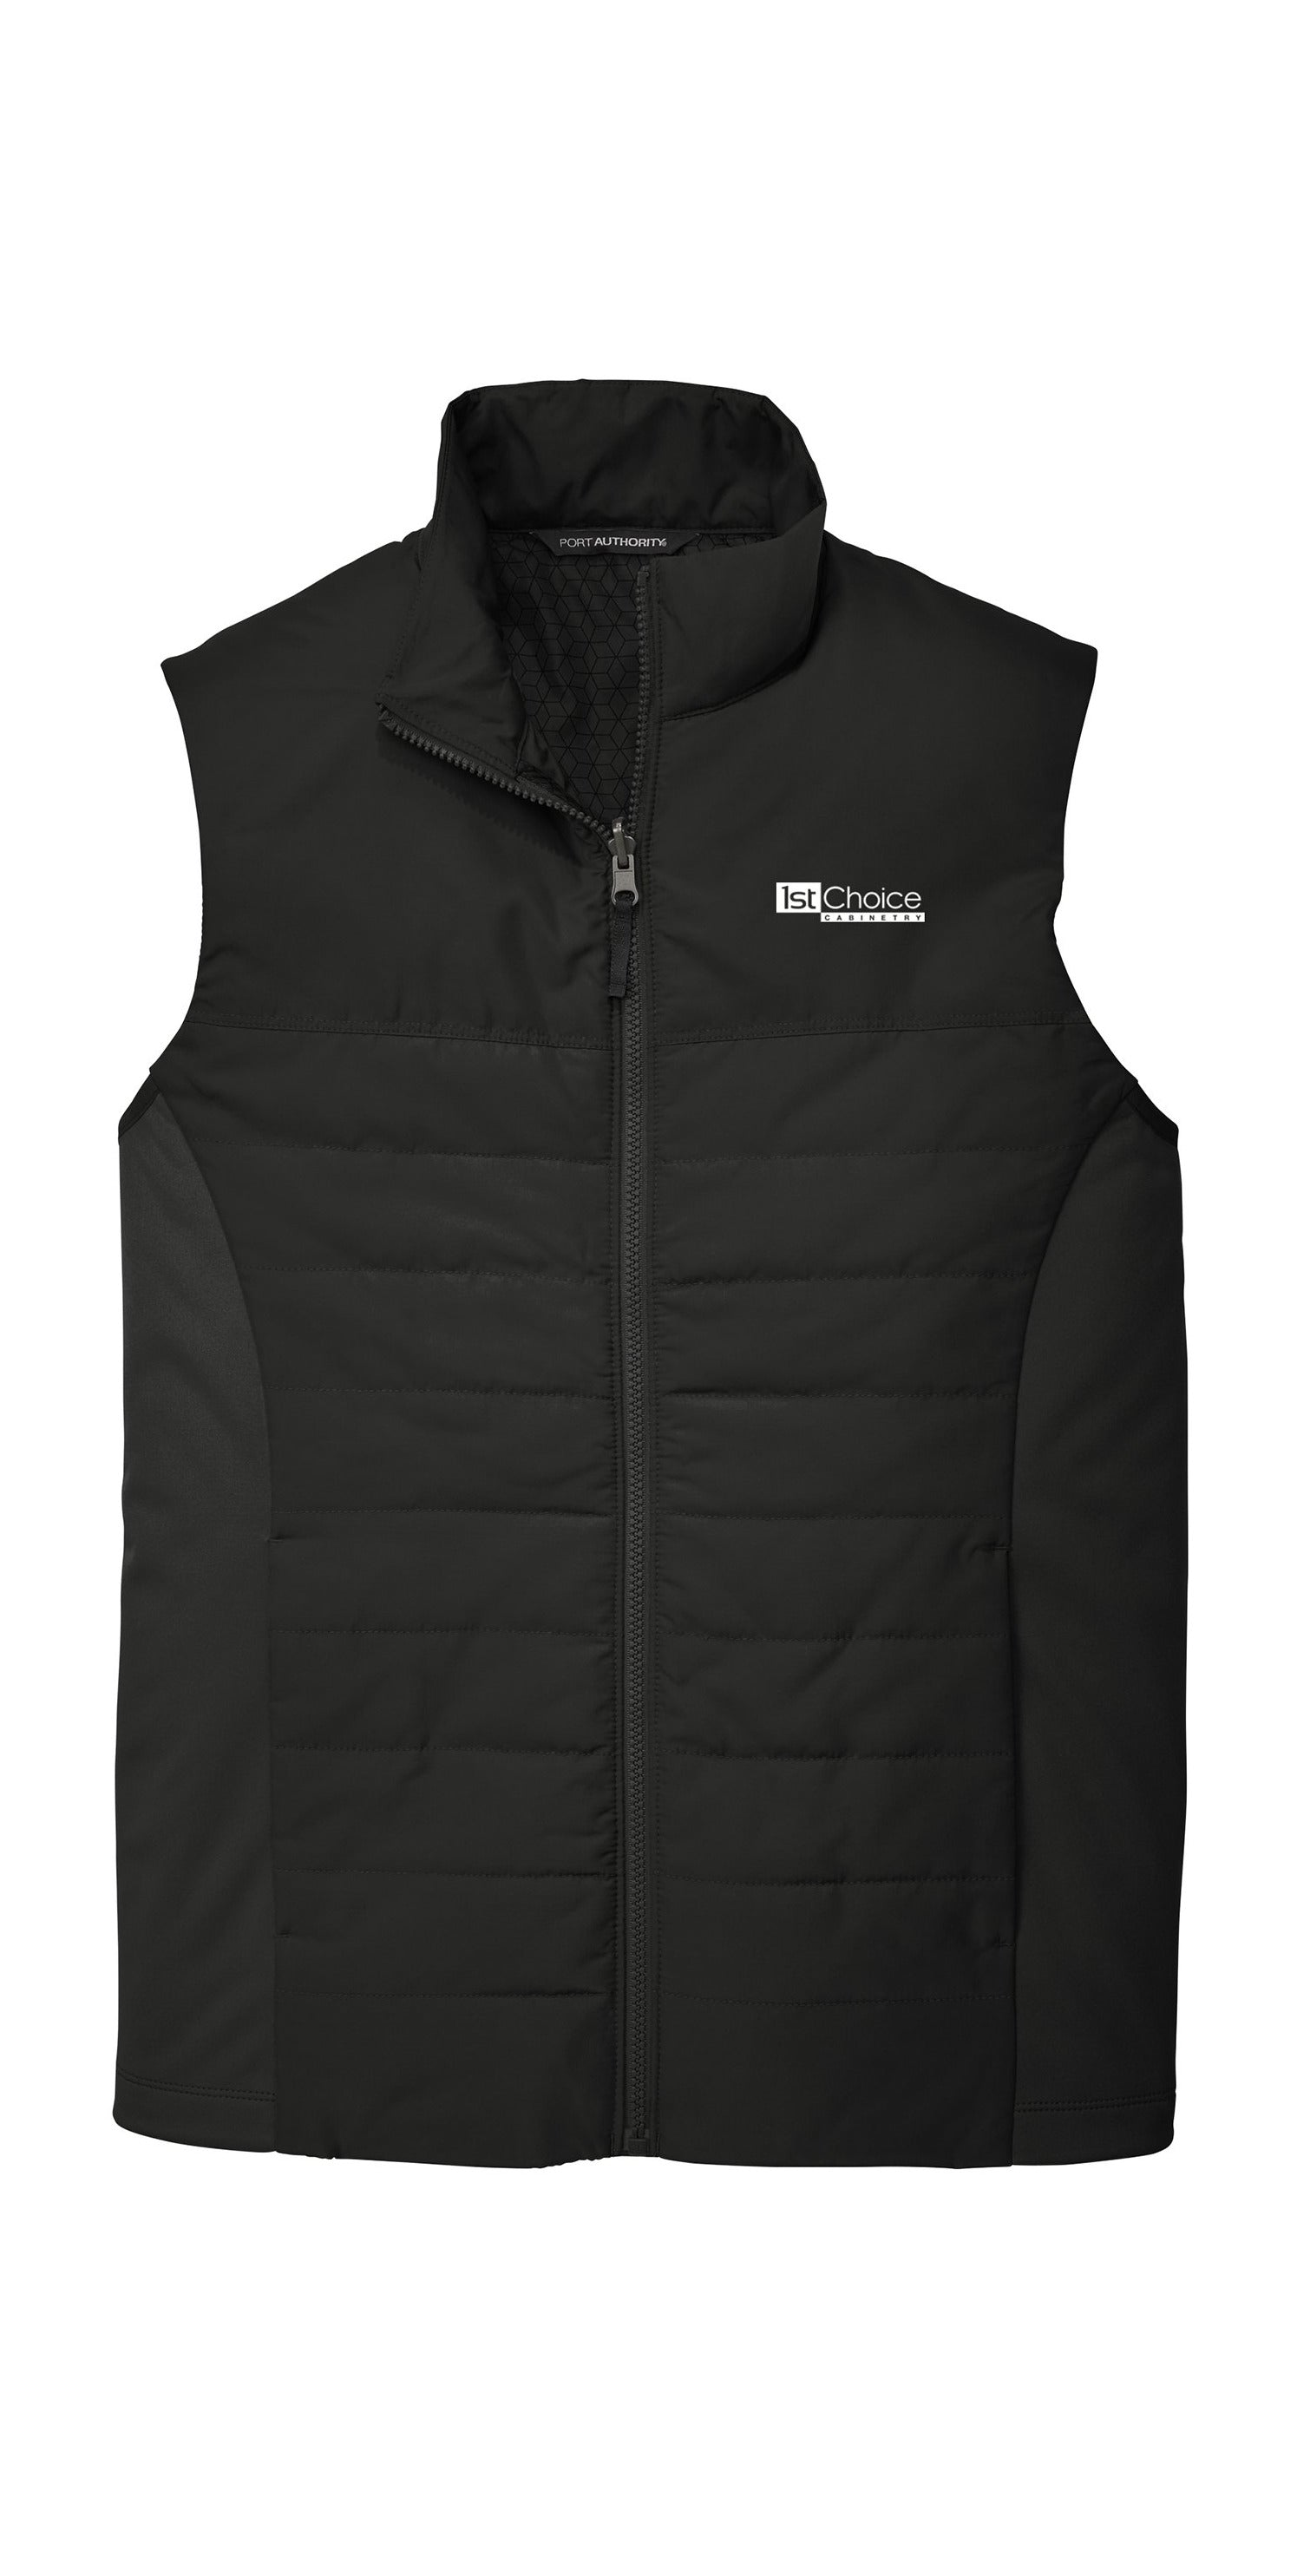 Men's Port Authority Collective Insulated Vest